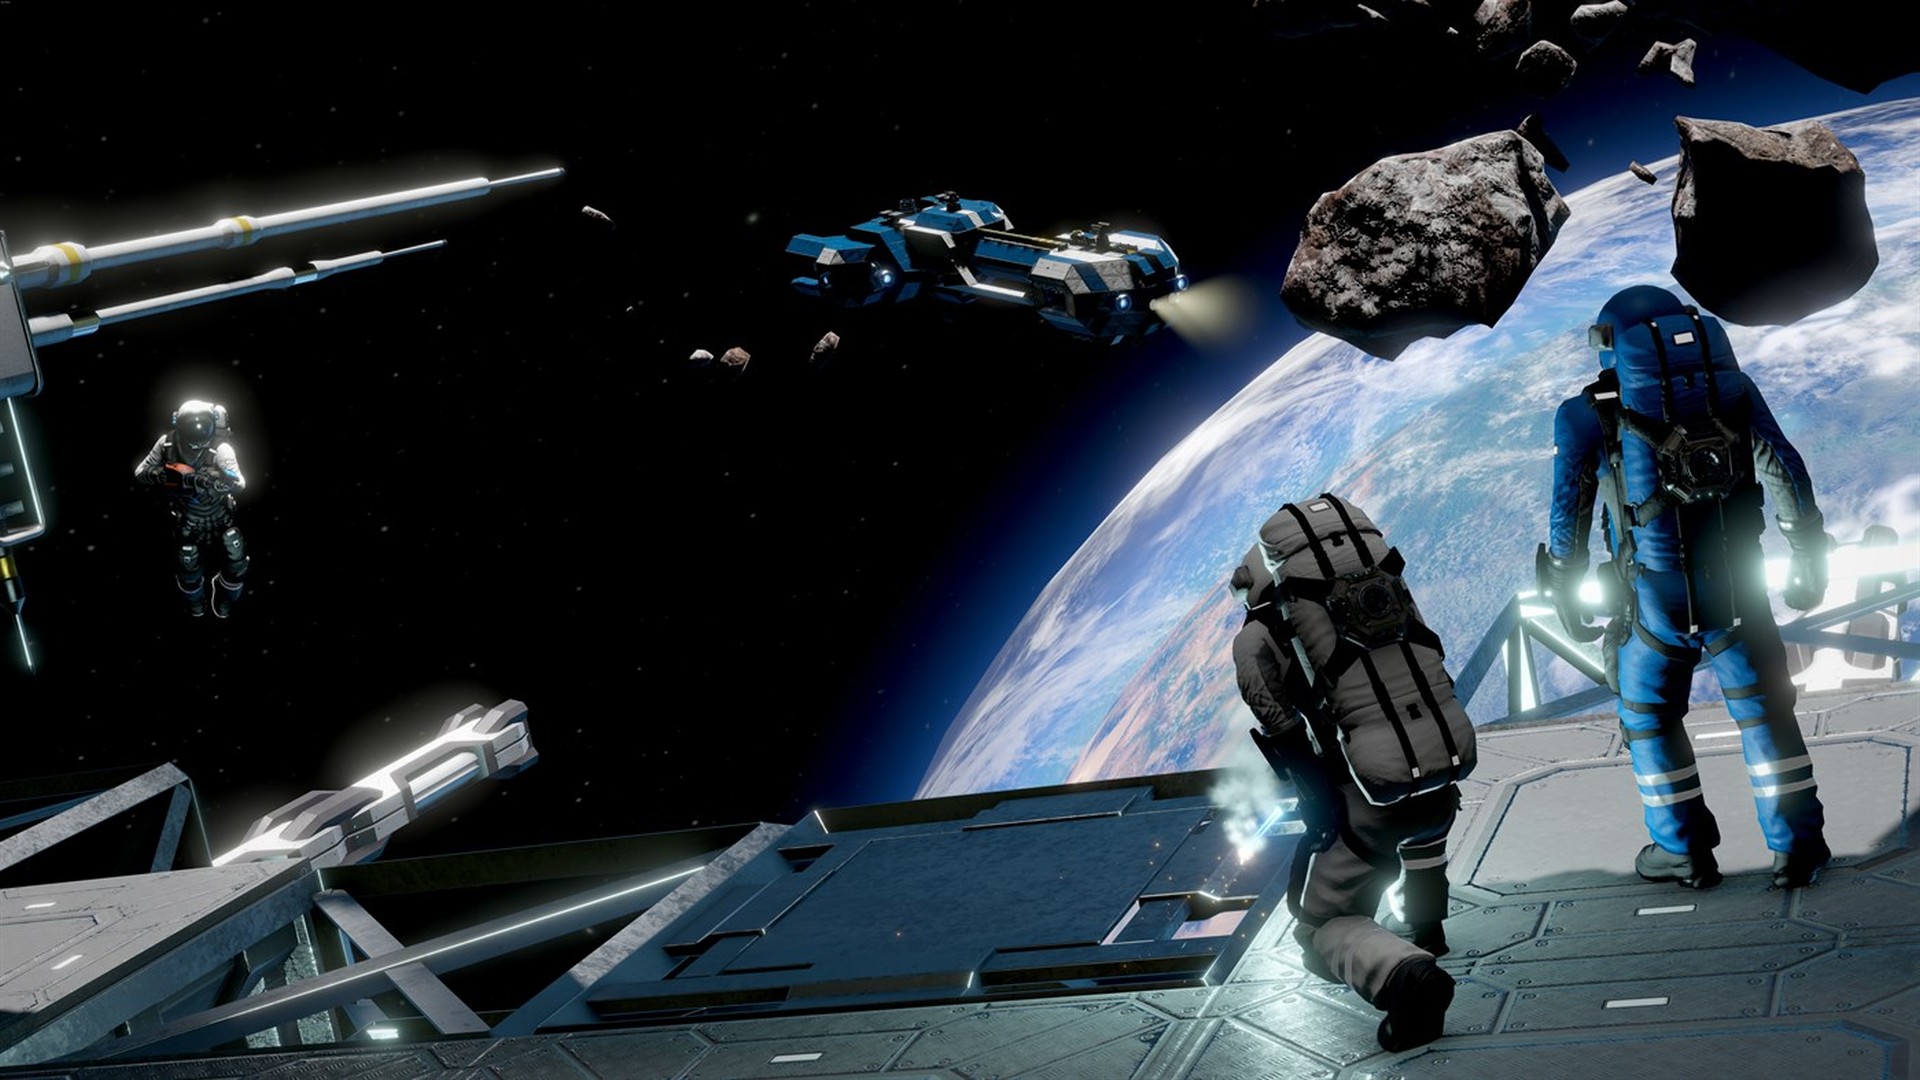 space engineers xbox one pre order release date